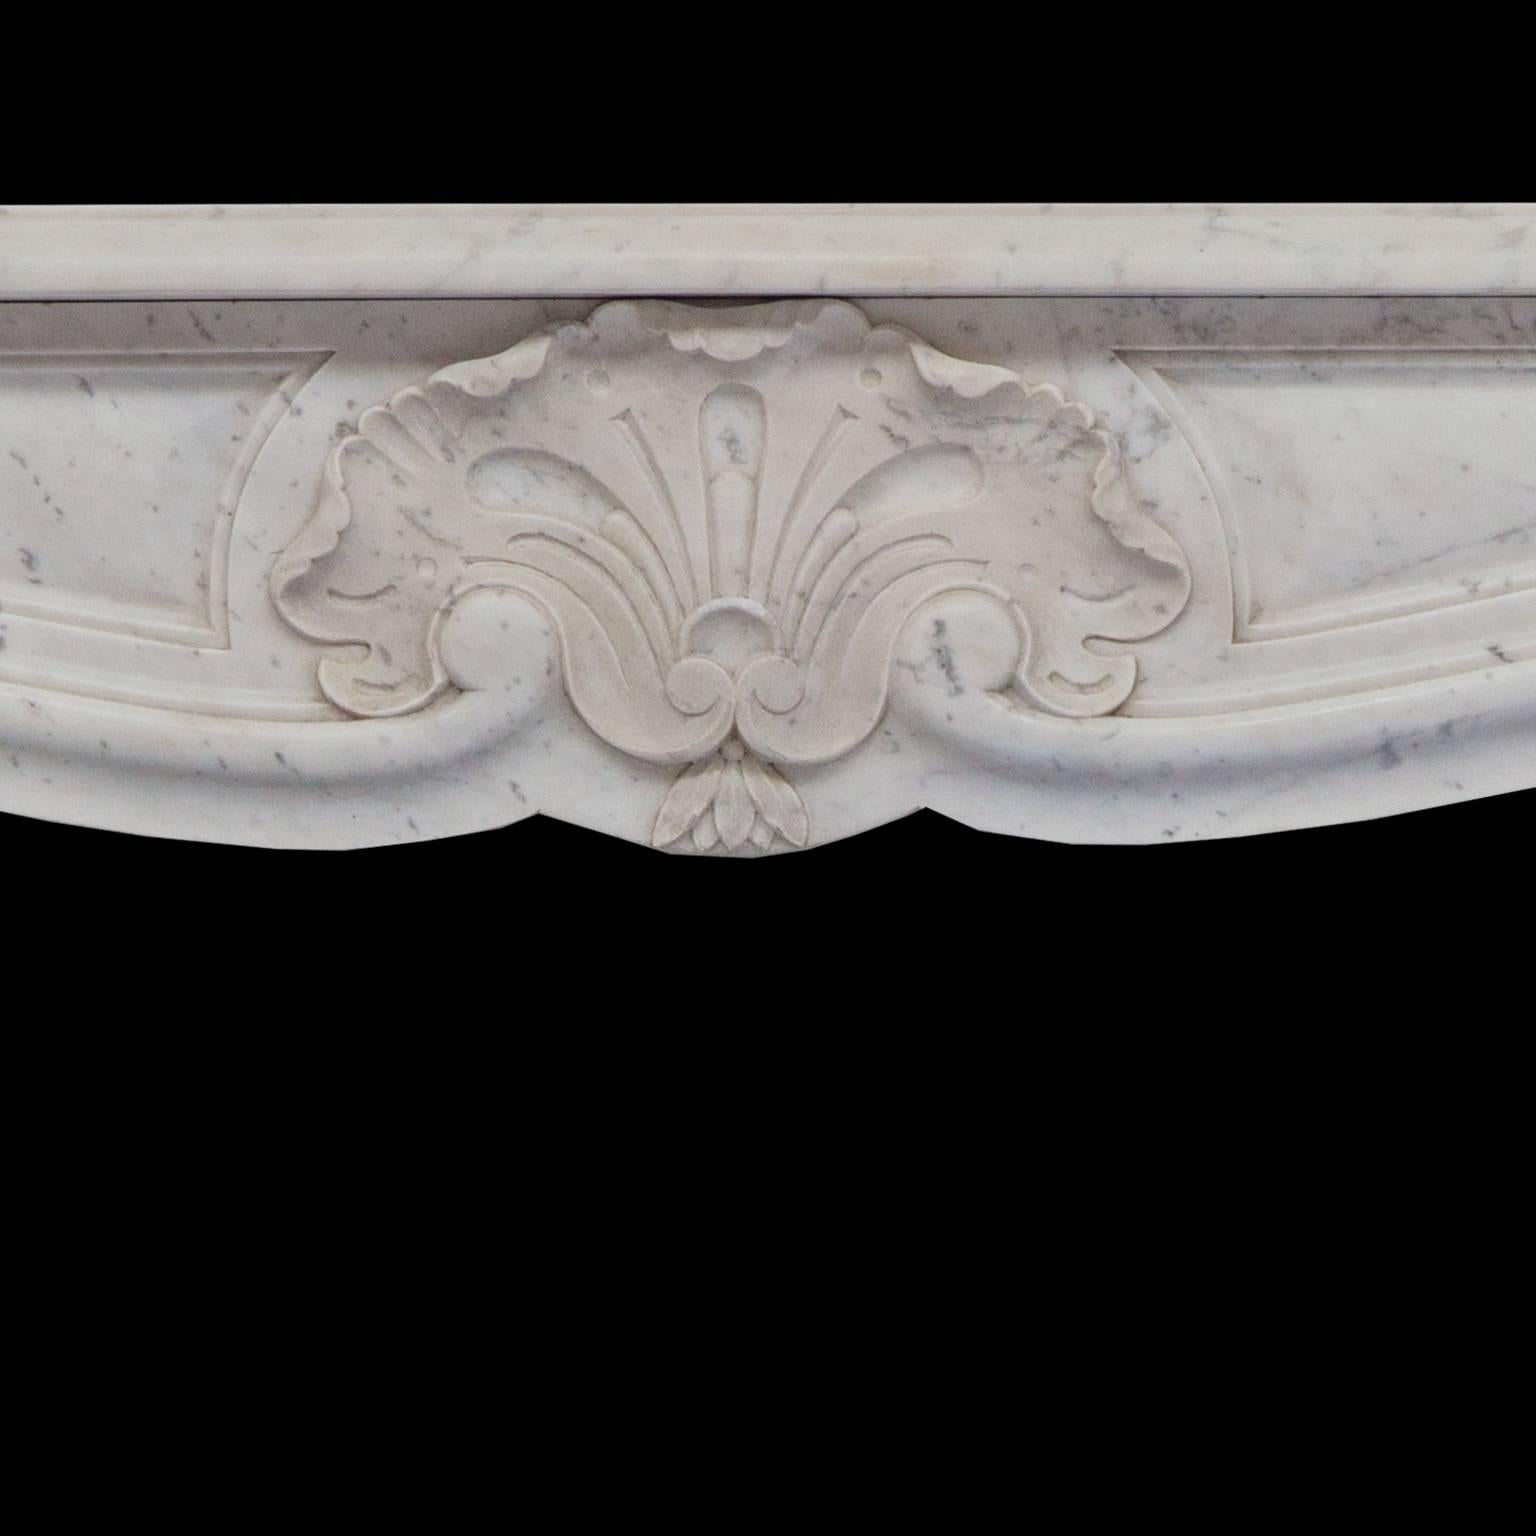 19th century antique Louis XV Loire white Carrara, hand-carved marble fireplace mantel.

38 1/4